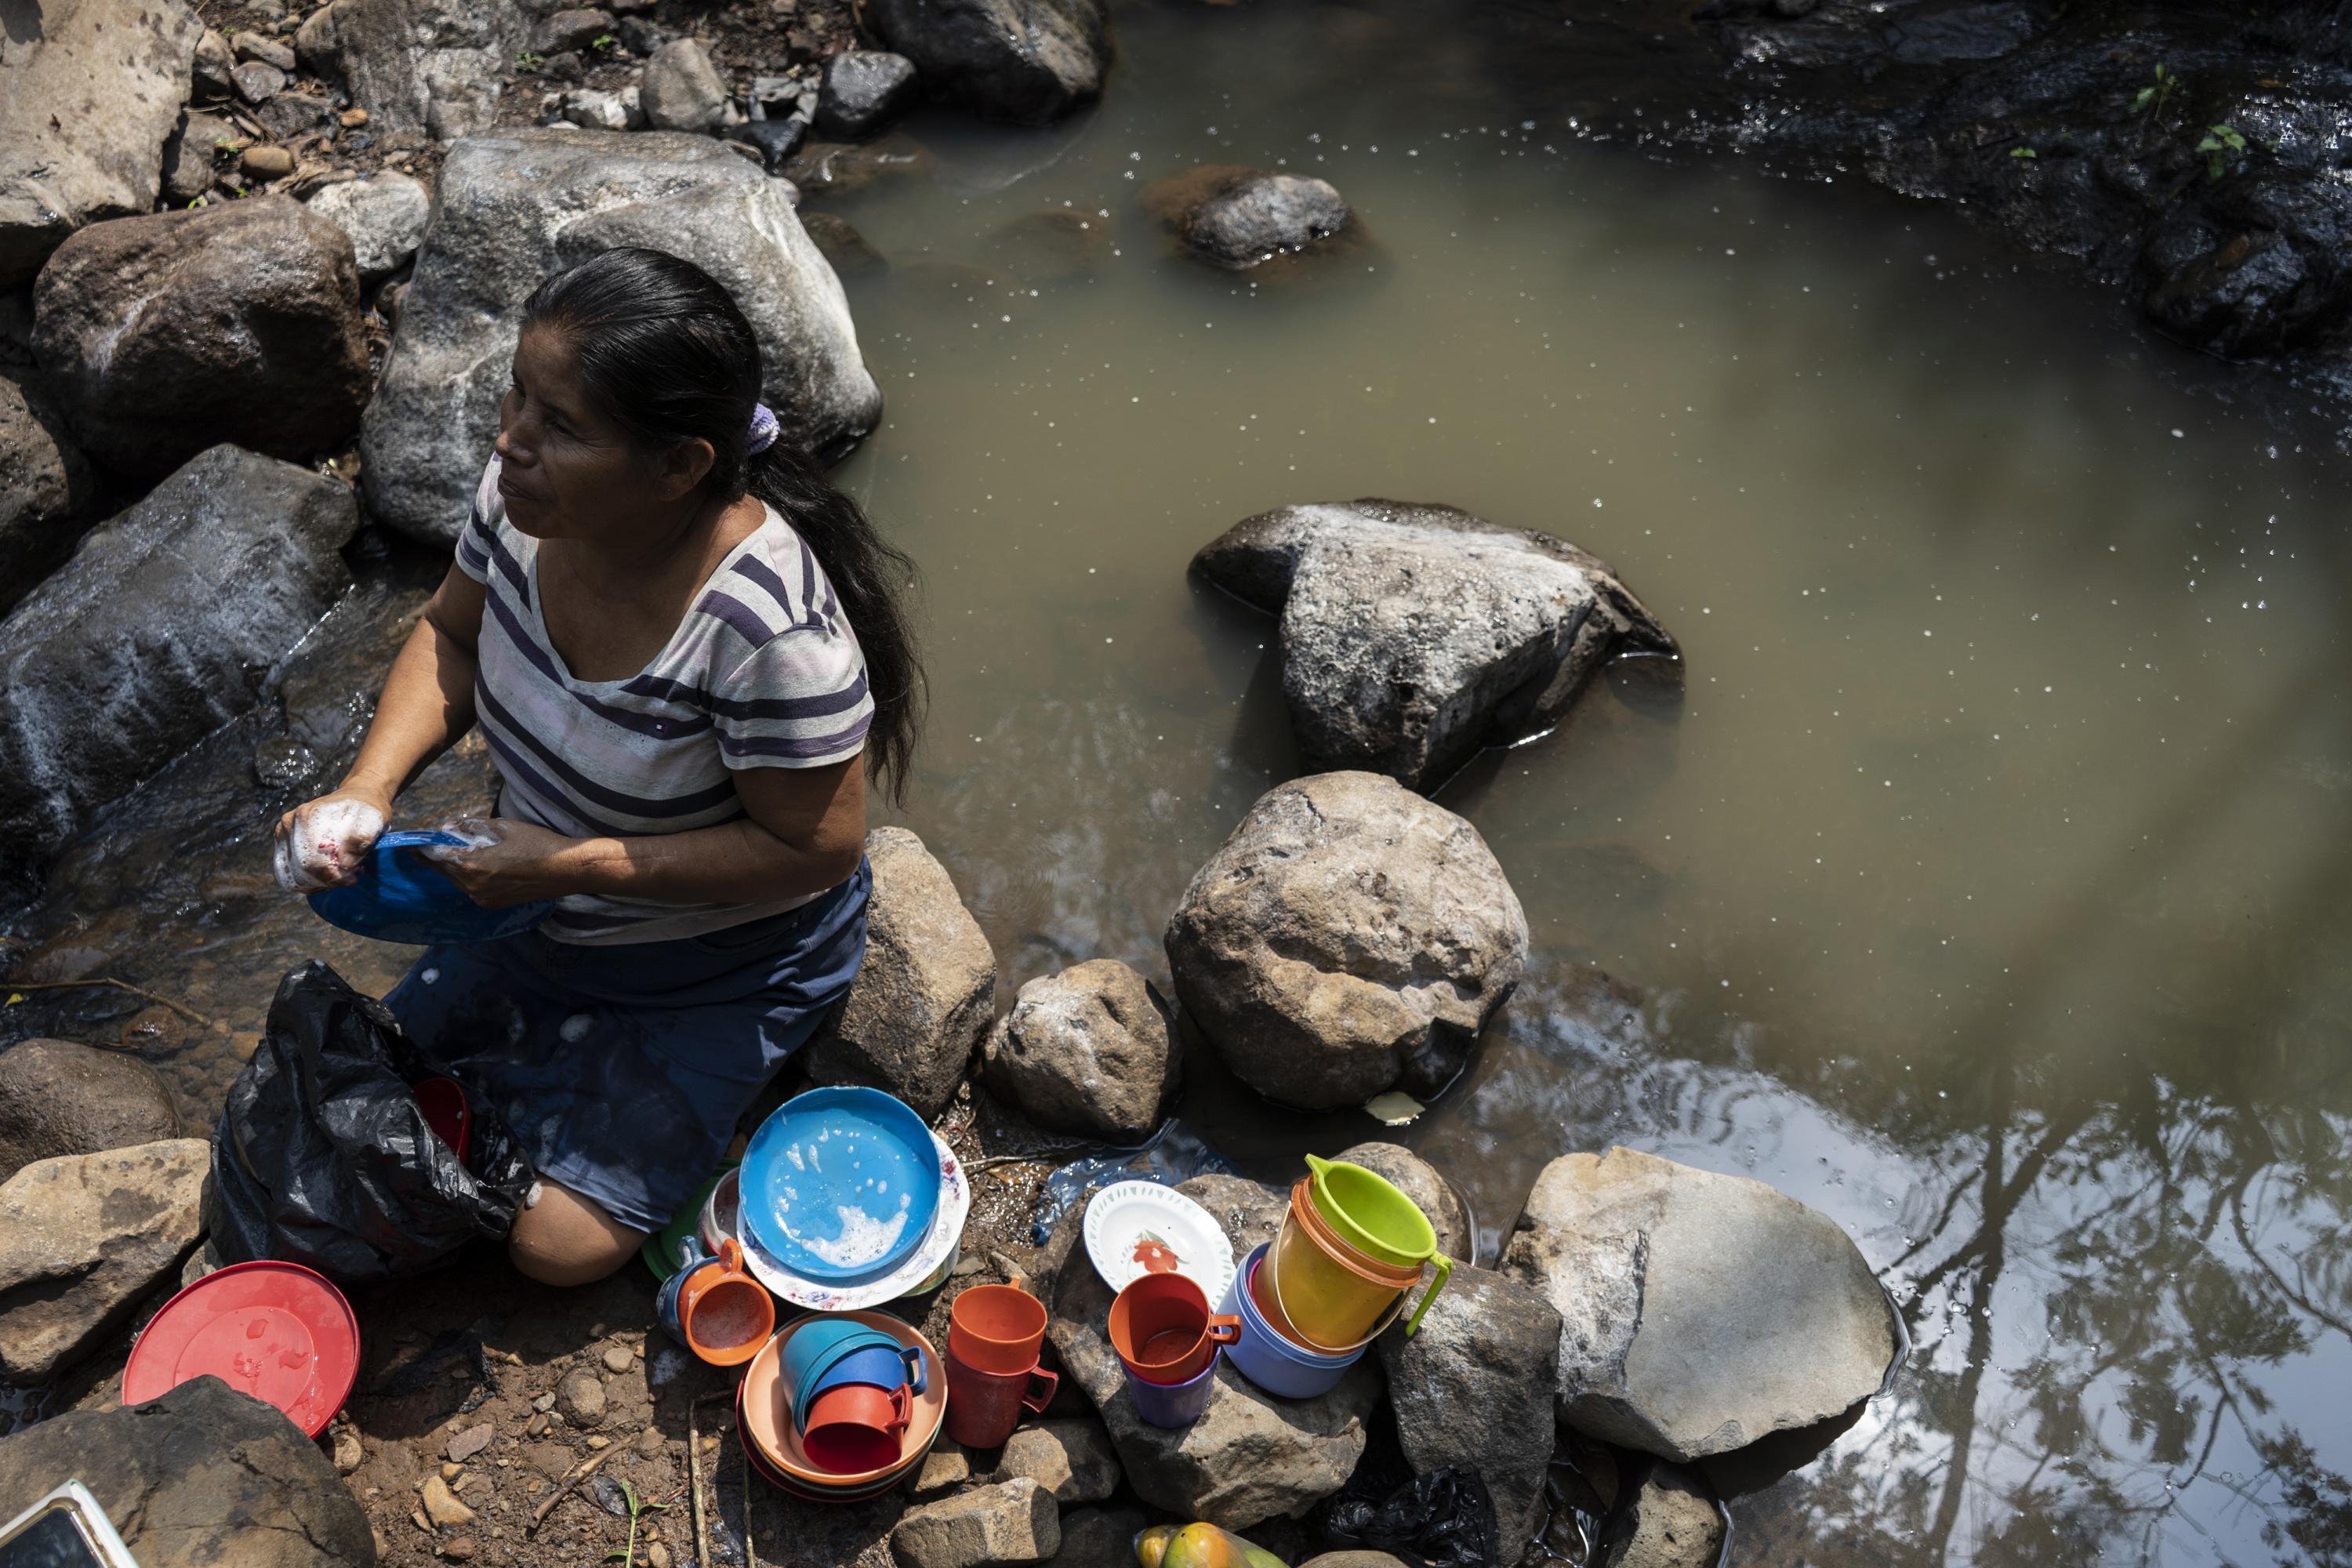 Santos Ángeles Hernández, 63, makes regular trips to El Llano creek to wash her family’s clothes and dishes. They walk through the mountains and along dirt paths for about 15 minutes to reach the murky stream that flows down from the hills and springs up between two large boulders, after passing through most of the pastures that surround the village of Matazano, in the canton of Valle Grande, north of San Simón — one of the poorest and most remote municipalities in the department of Morazán. Santos scrubs and rinses her dishes in the water, puts them in a black plastic bag, and carries them back home. She, her husband, and their four grandchildren eat from these dishes. Santos also makes a living by washing her neighbors’ clothes; she earns about $5 a day, which she spends on the two pounds of beans that will feed her family for two weeks.